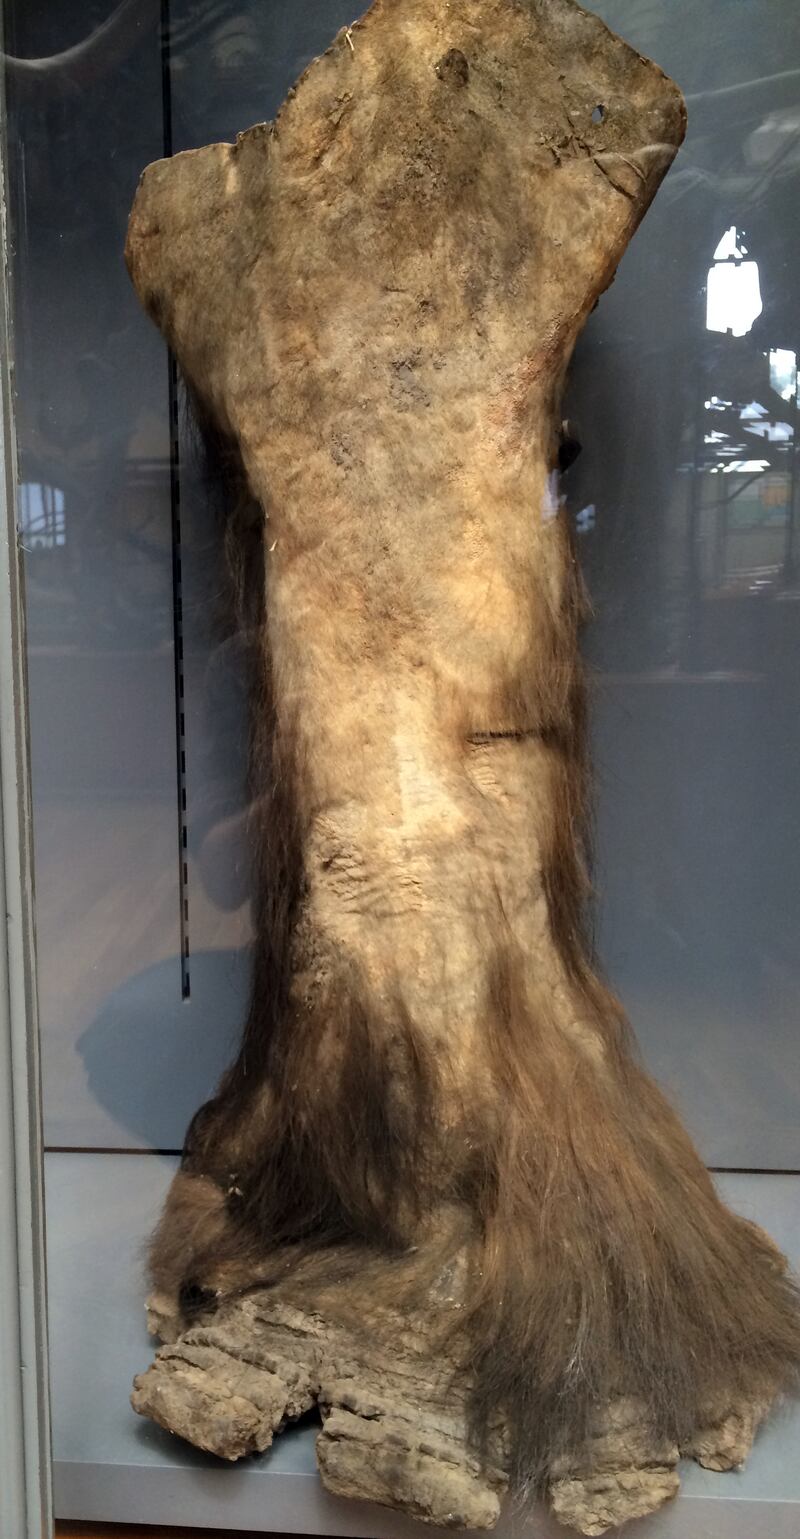 A leg with the skin and fur of a mammoth on display at the Museum of Natural History in Paris, France. Photo: Matt Mechtley 

